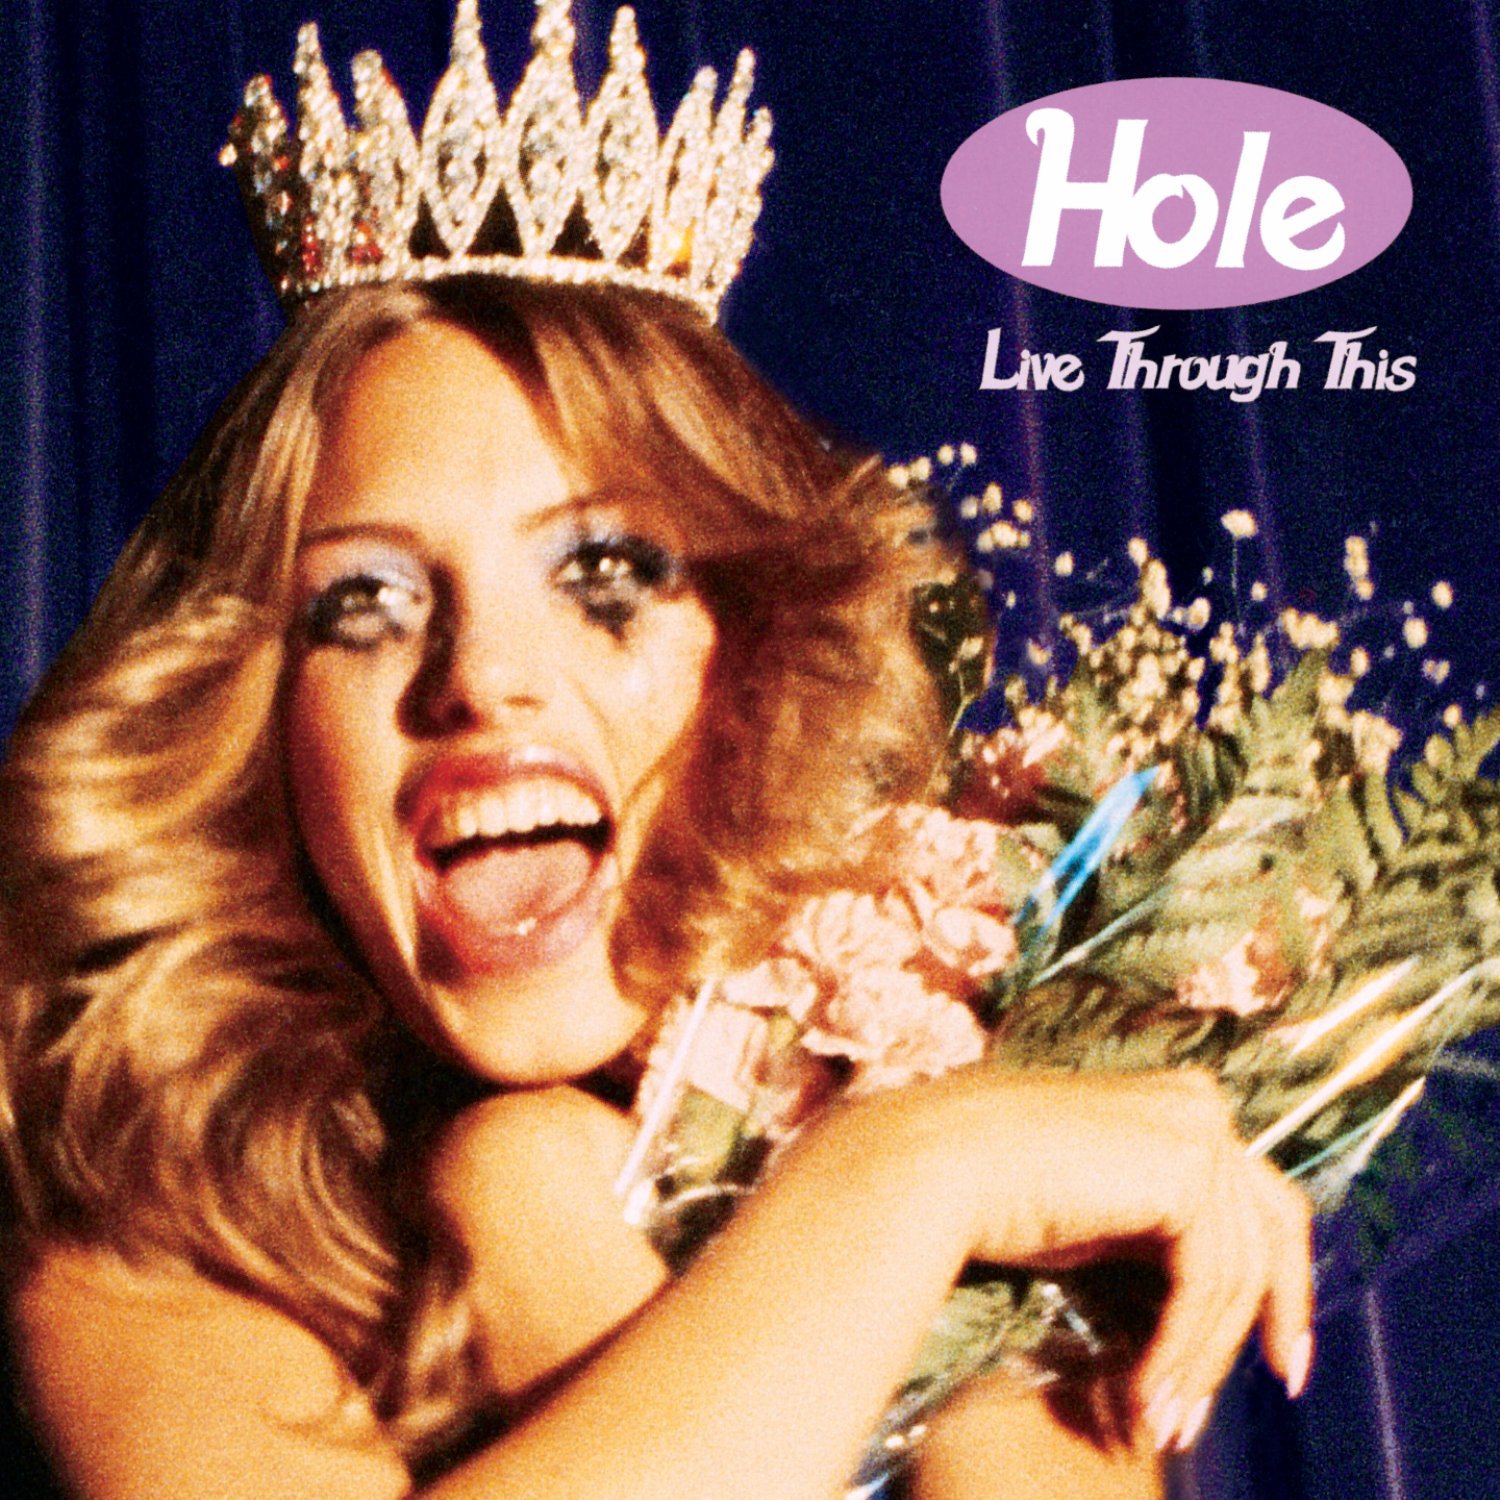 The album cover for Hole's Live Through This